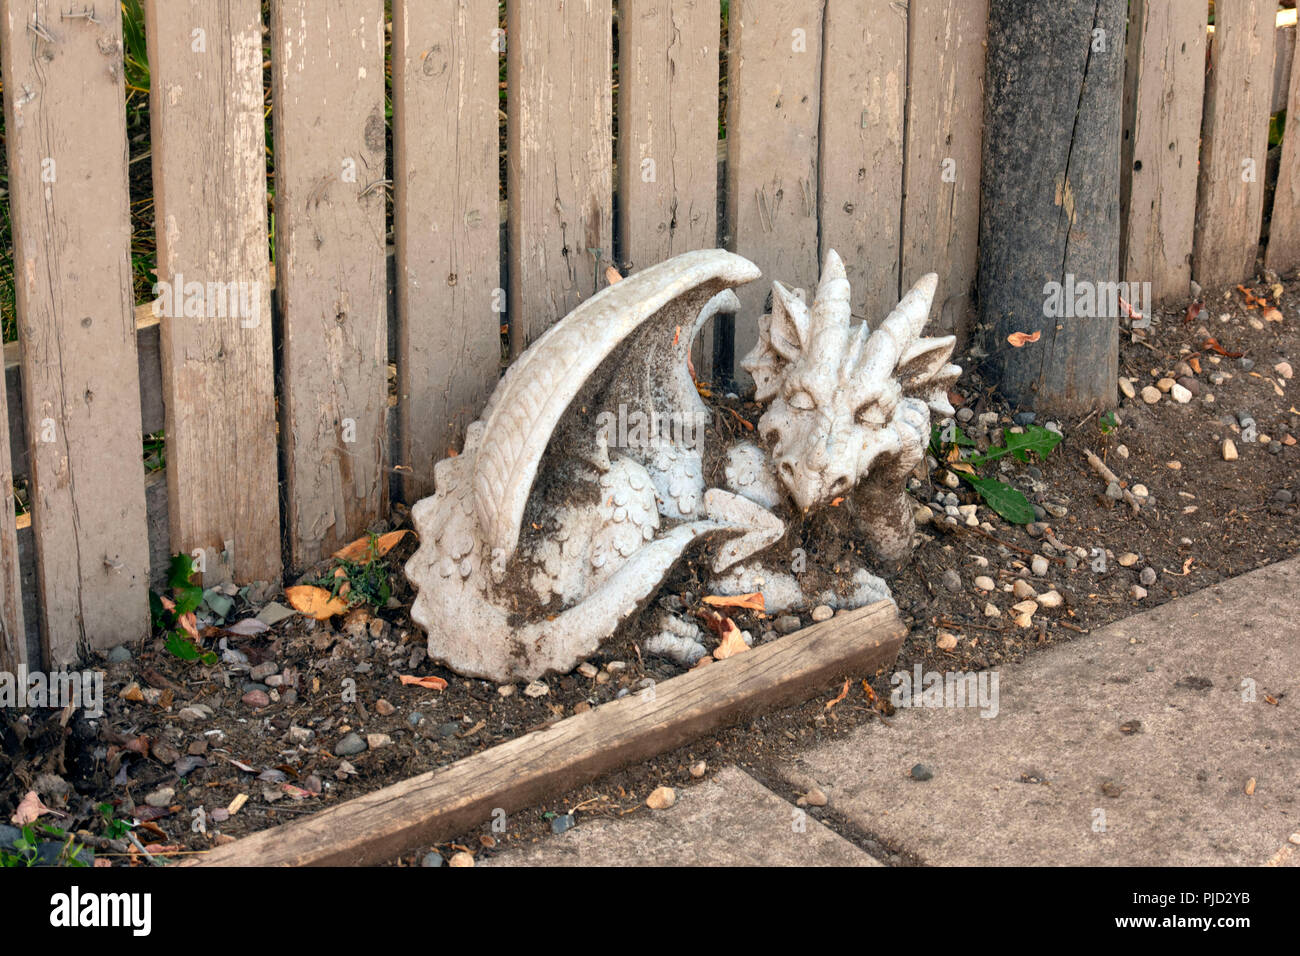 garden dragon landscape dragon ornament sitting beside a walkway with the backdrop of a fence Stock Photo